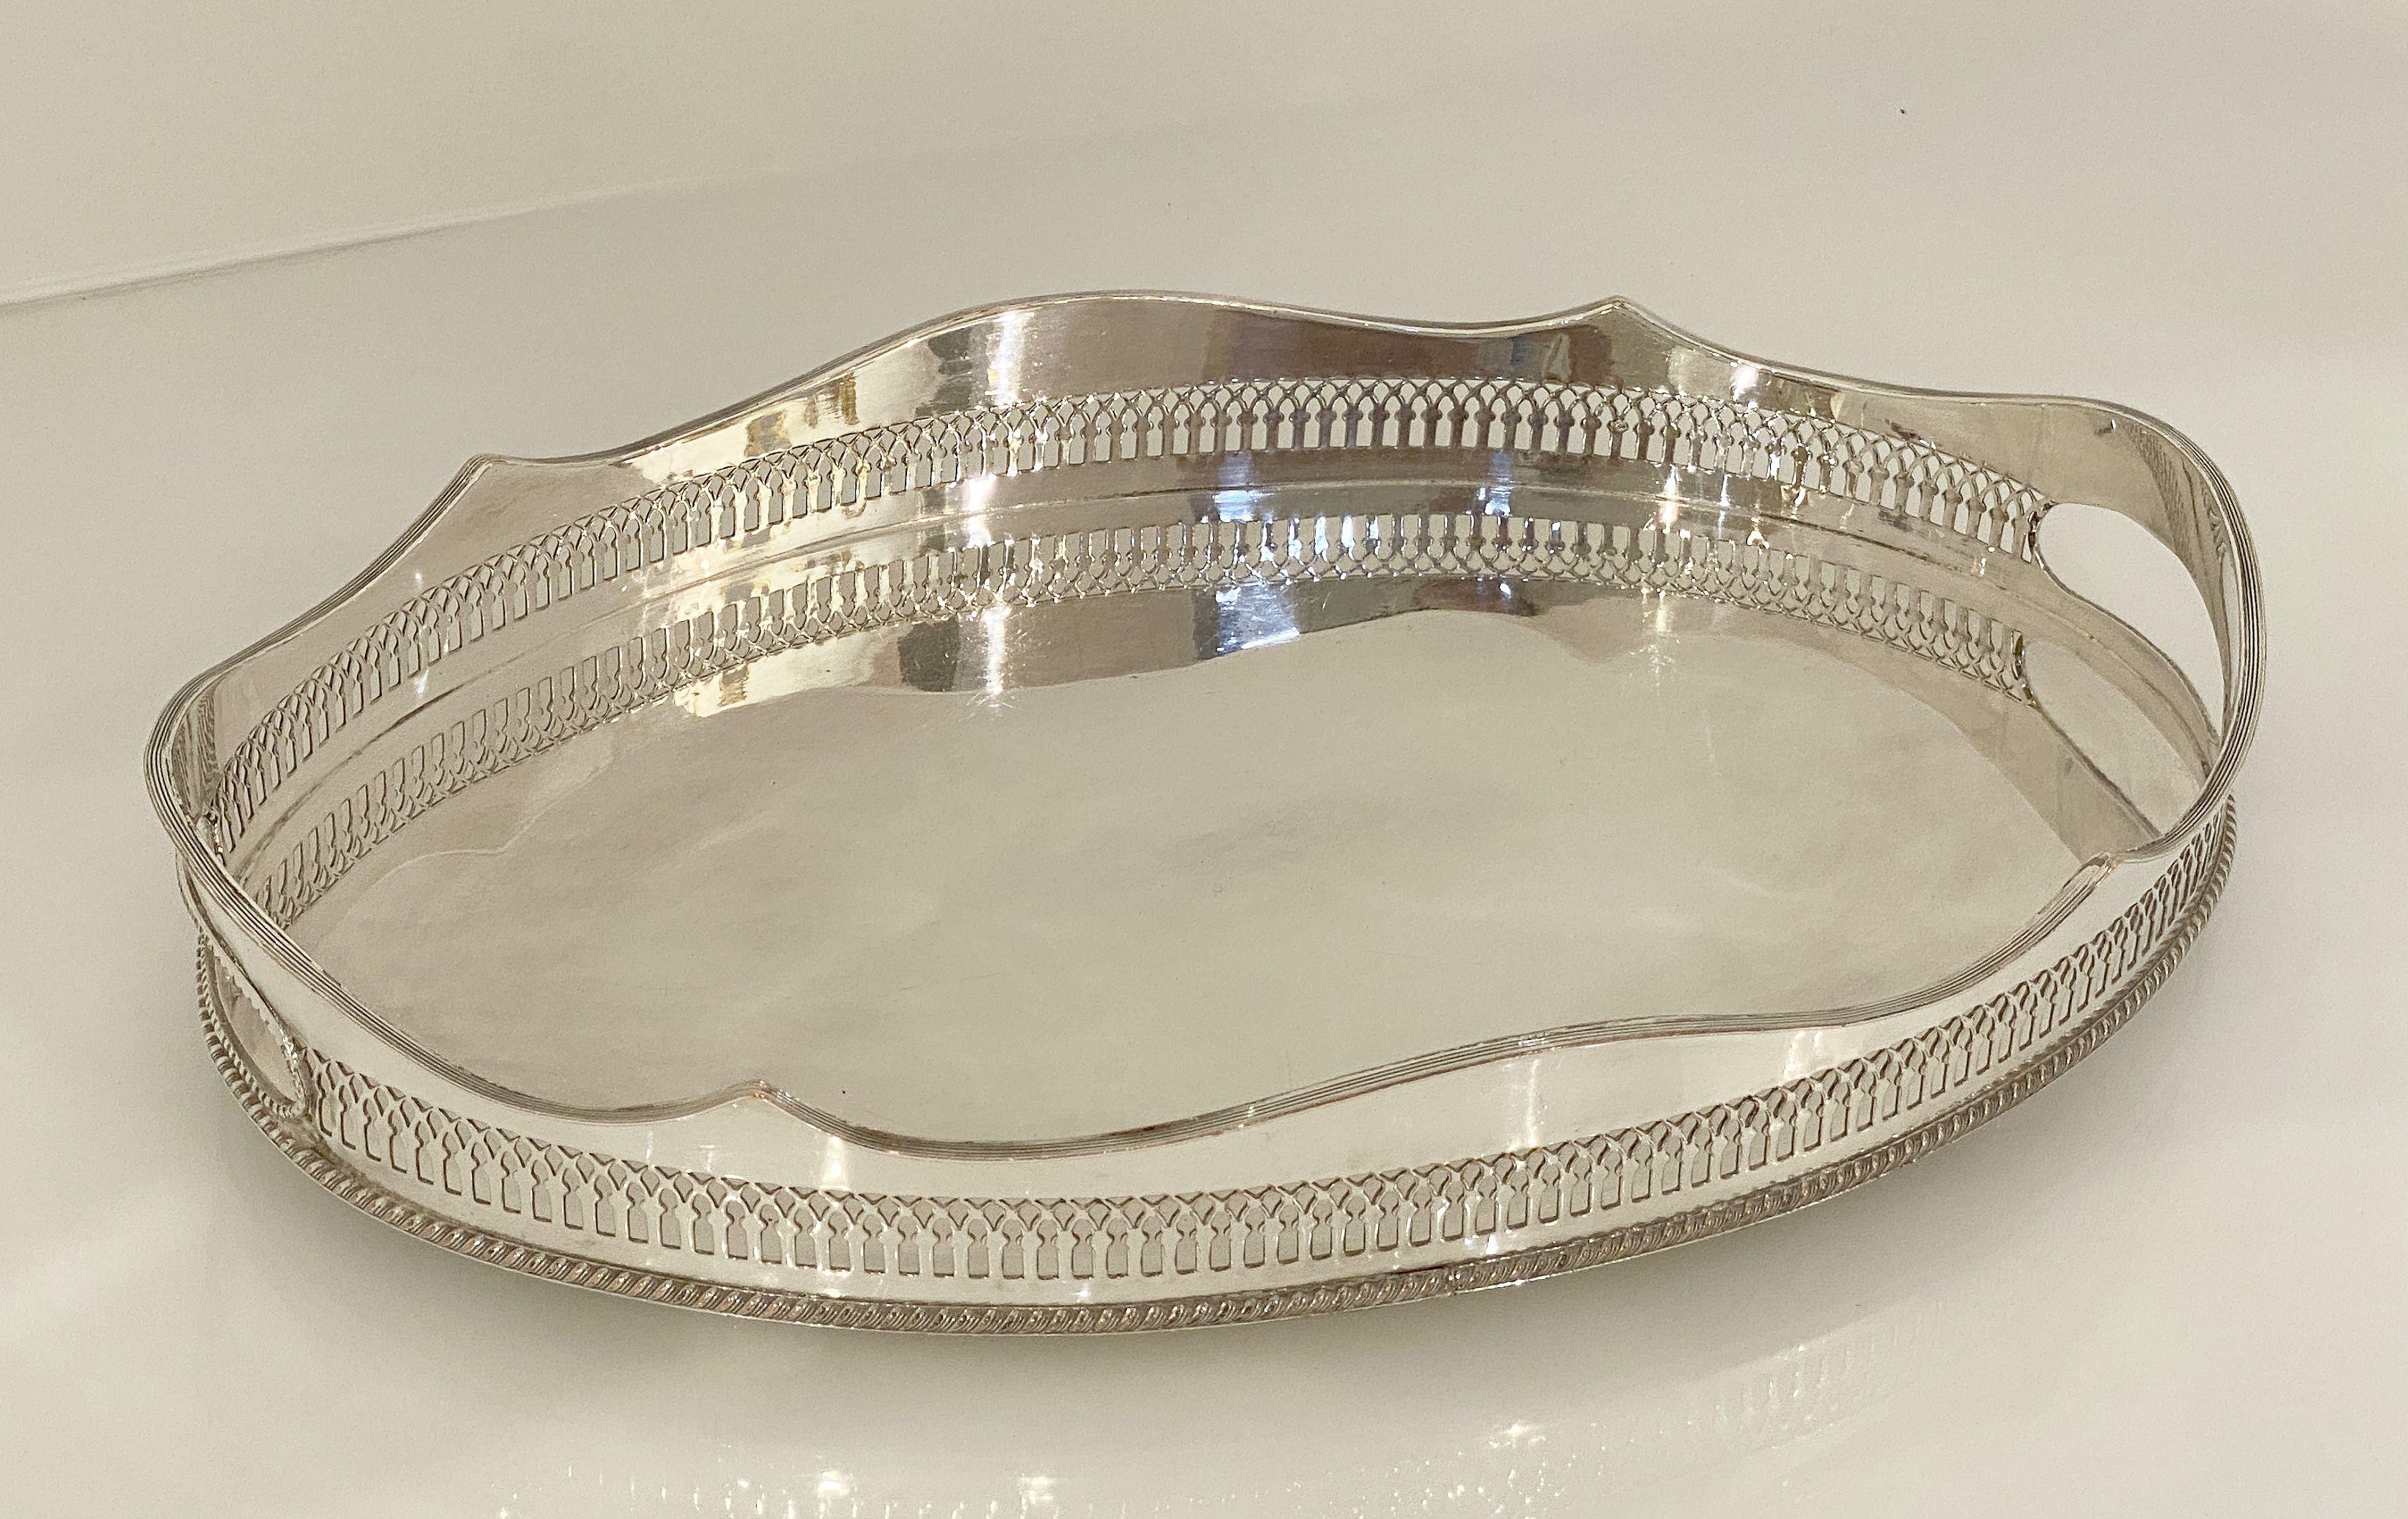 A handsome English oval gallery serving or drinks tray (or platter) of fine plate silver - featuring a pierced serpentine gallery with a distinctive design around the circumference.

Dimensions: Gallery H 2 1/2 inches x W 14 5/8 inches x D 10 1/8